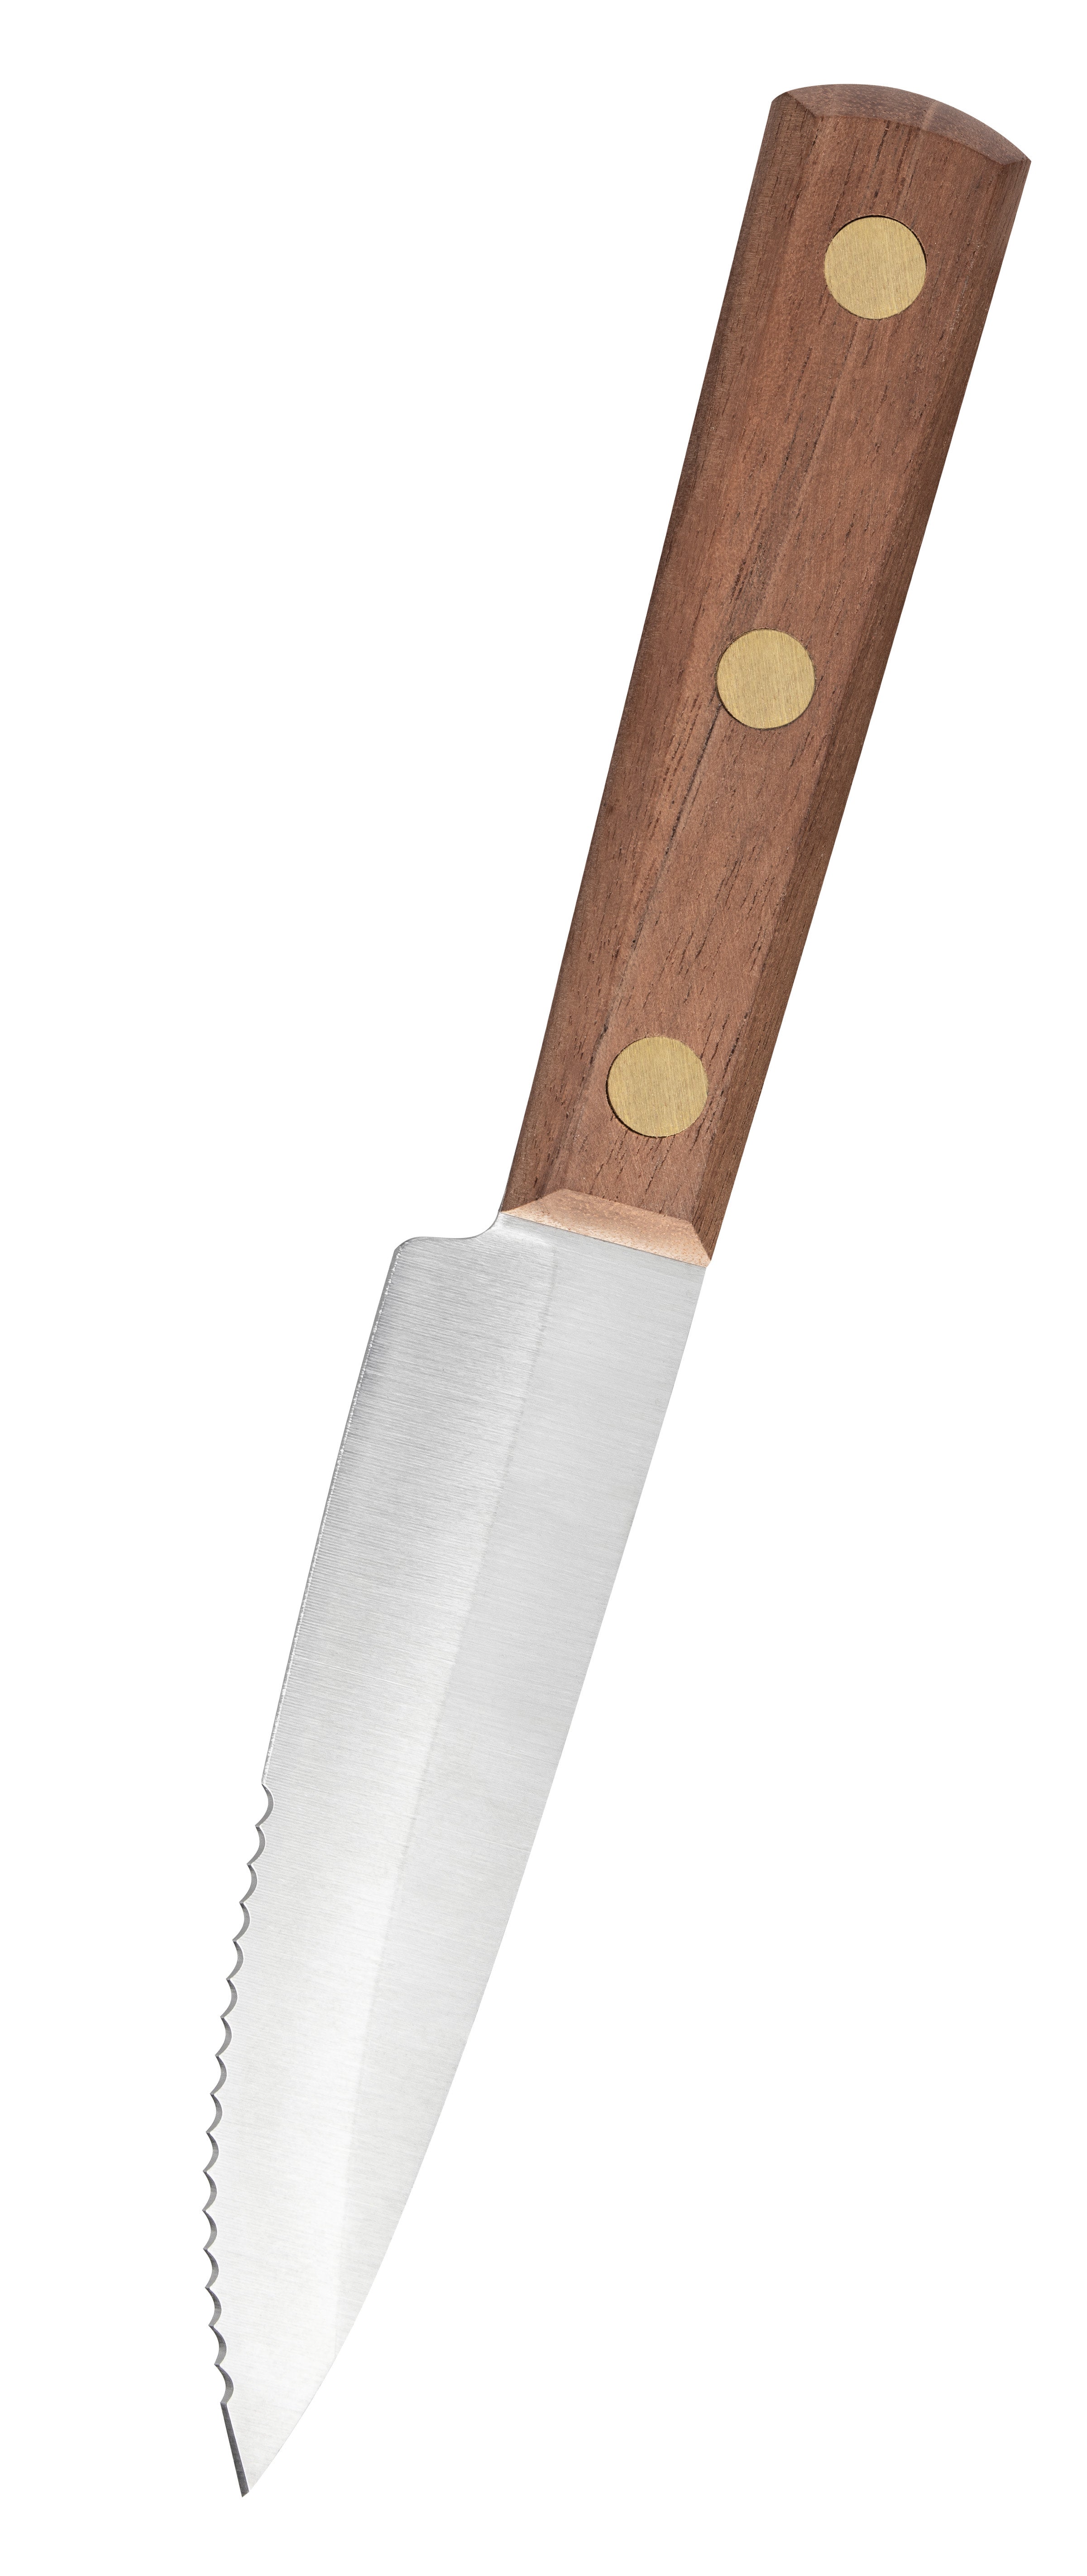 Household Cutlery 8" Slicing Knife (Solid Walnut) in Hand